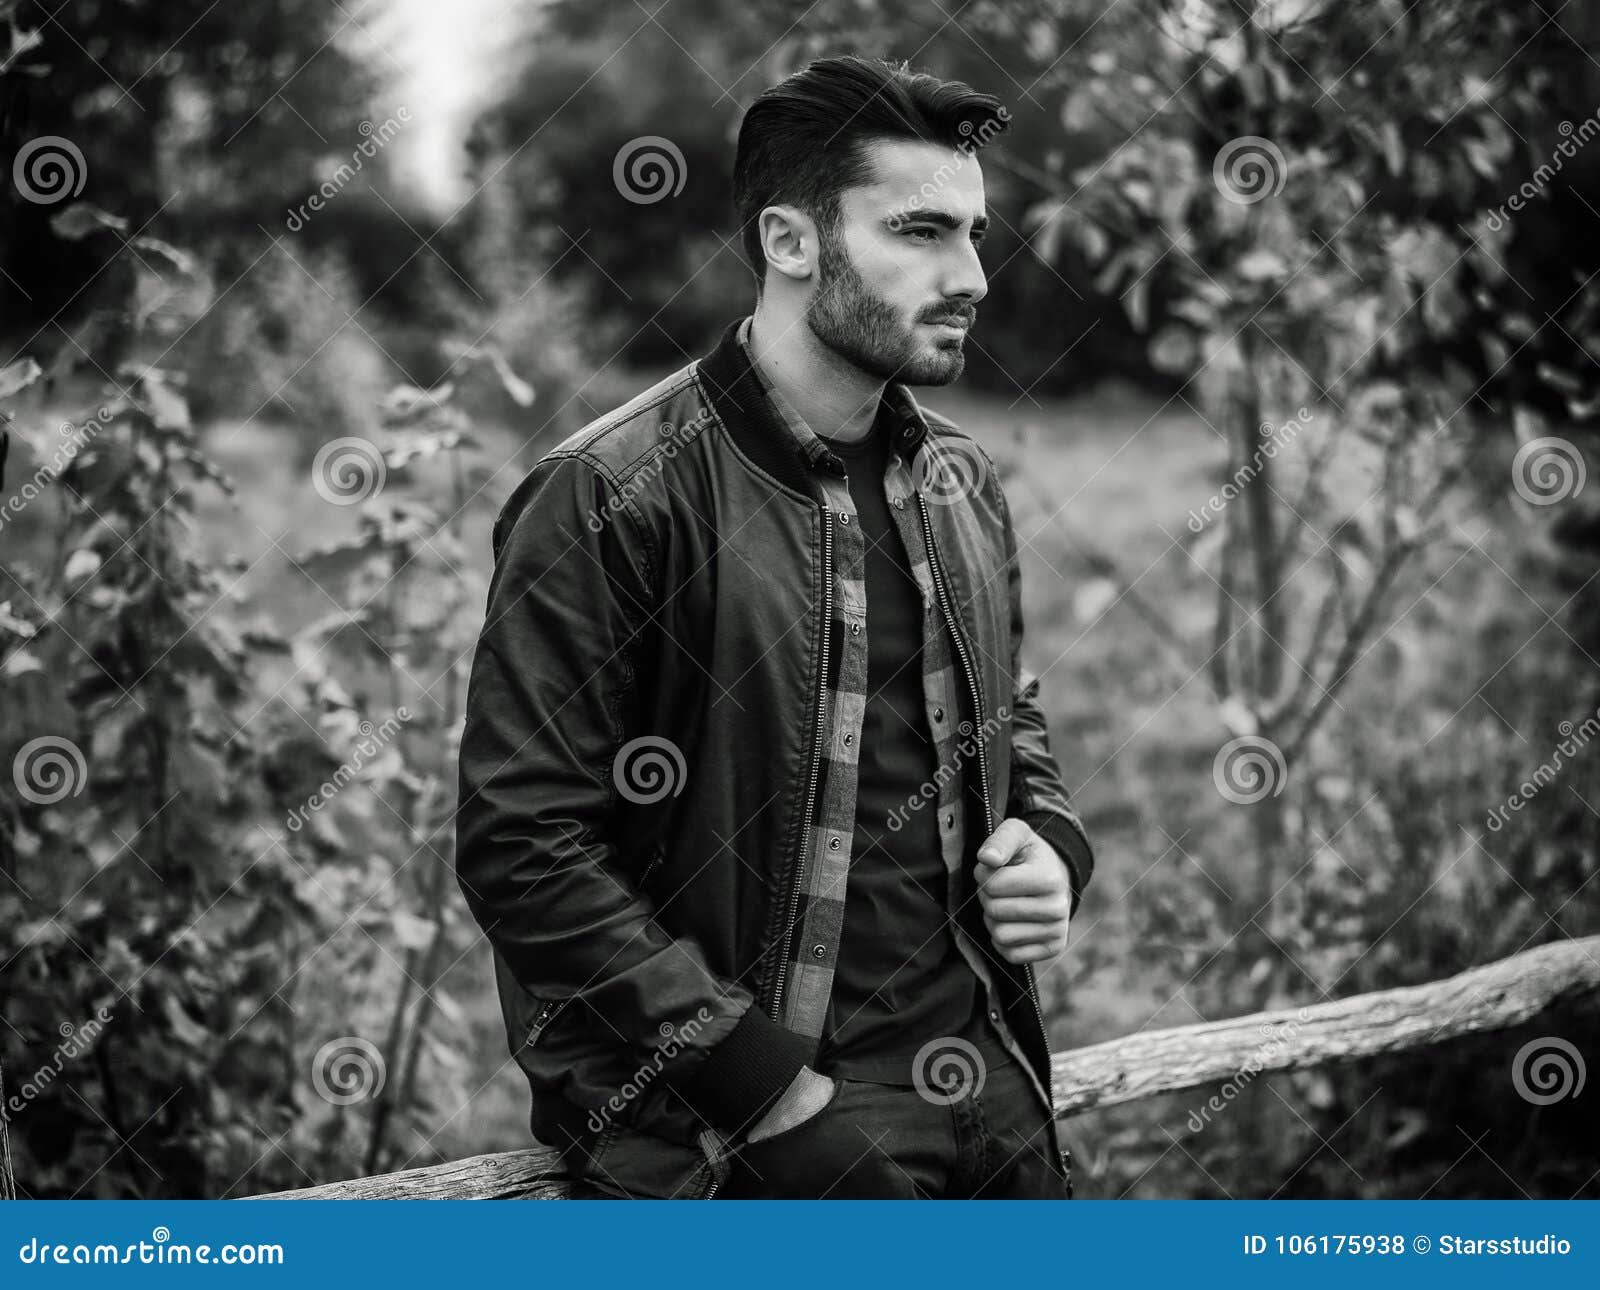 Portrait of Rustic Man Leaning on Wooden Fence Stock Photo - Image of ...